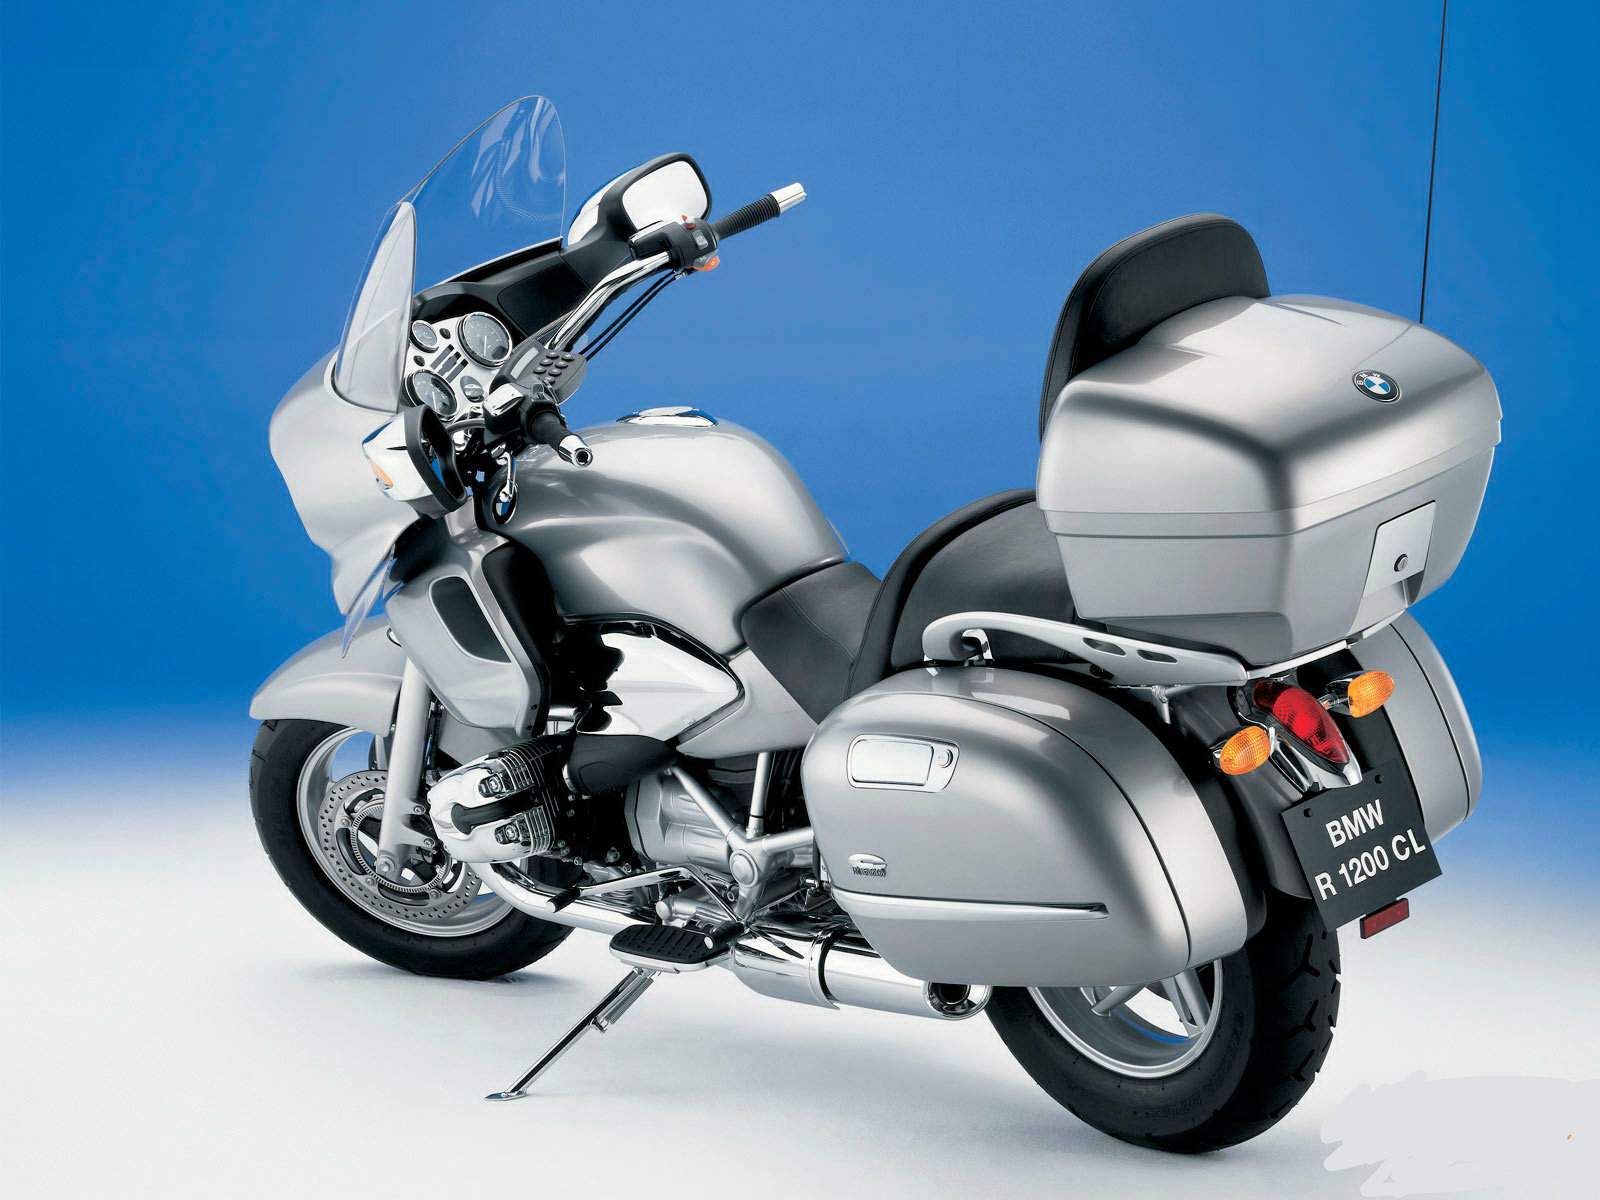 BMW R 1200CL technical specifications